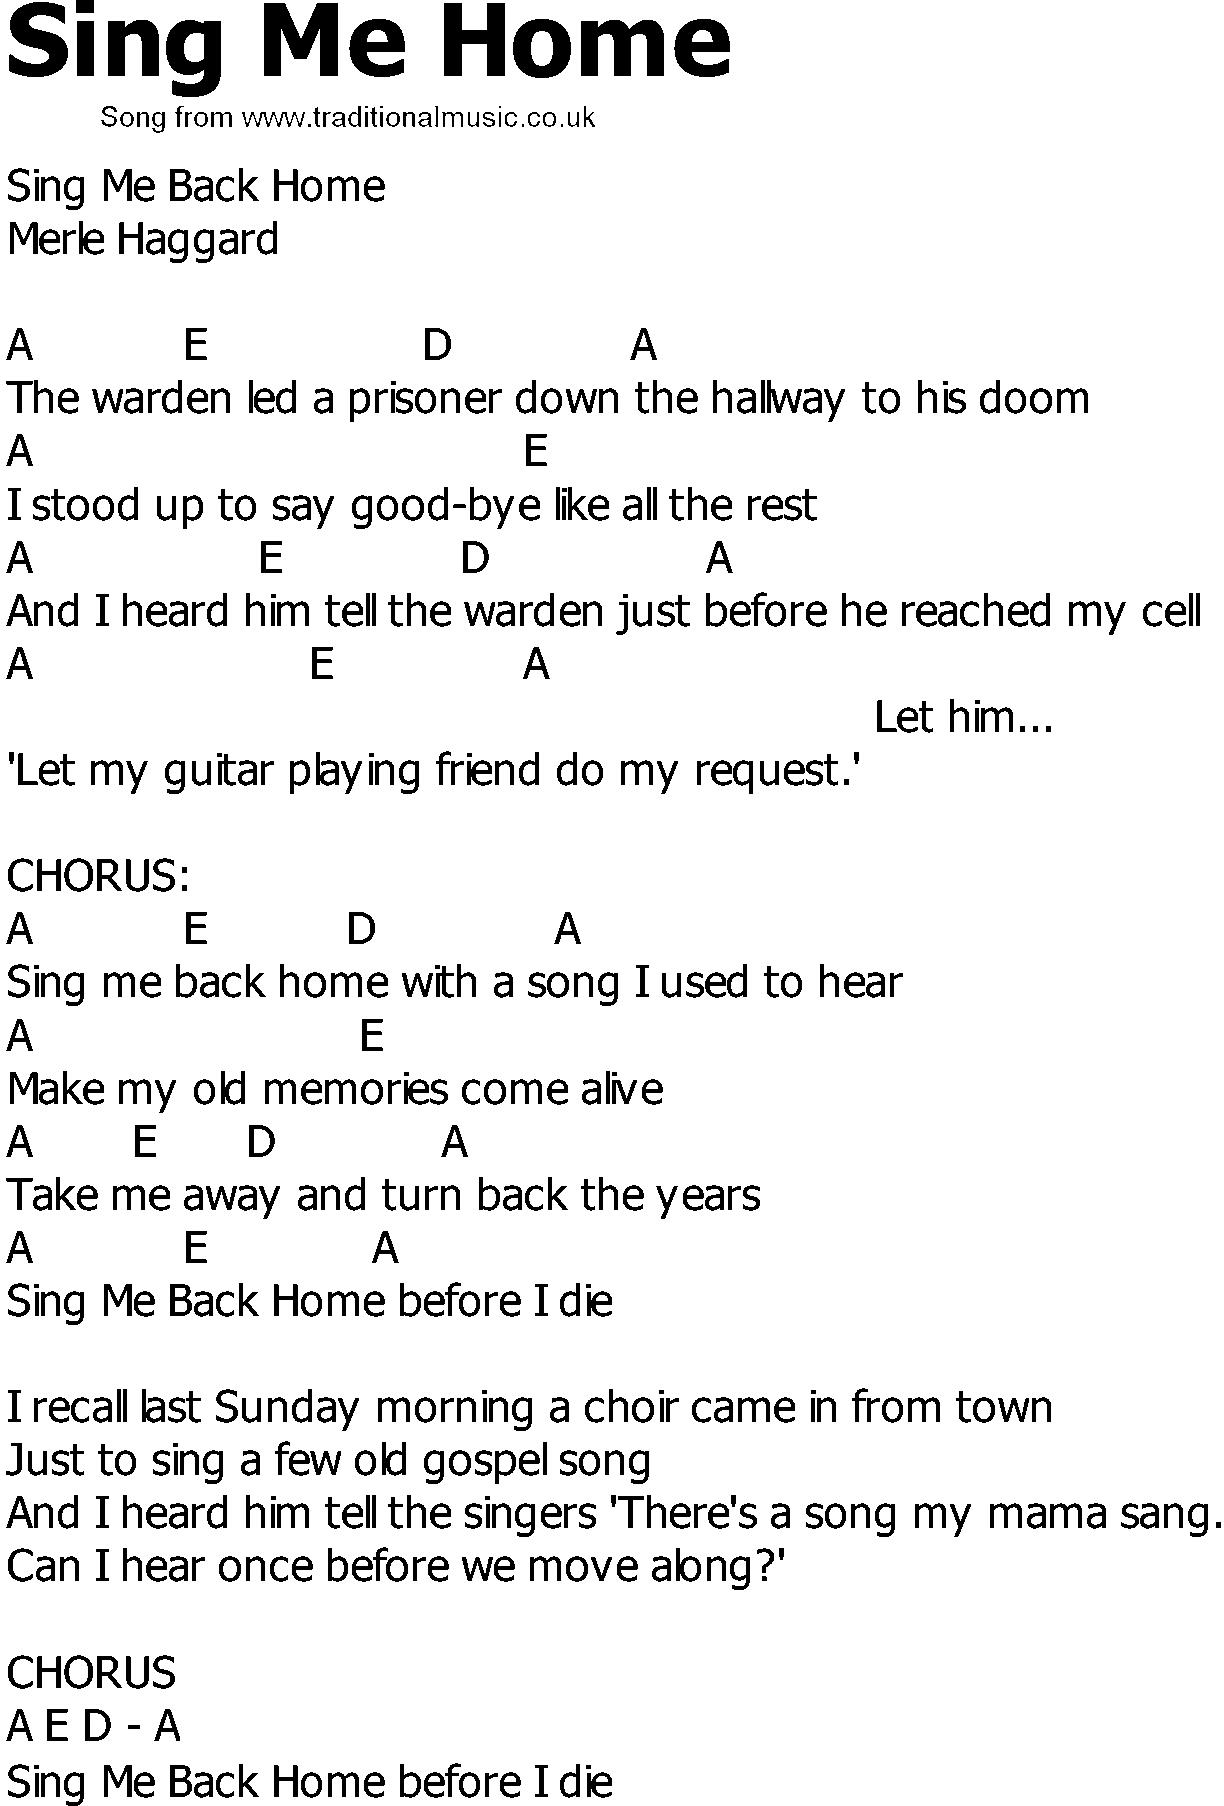 Old Country song lyrics with chords - Sing Me Home